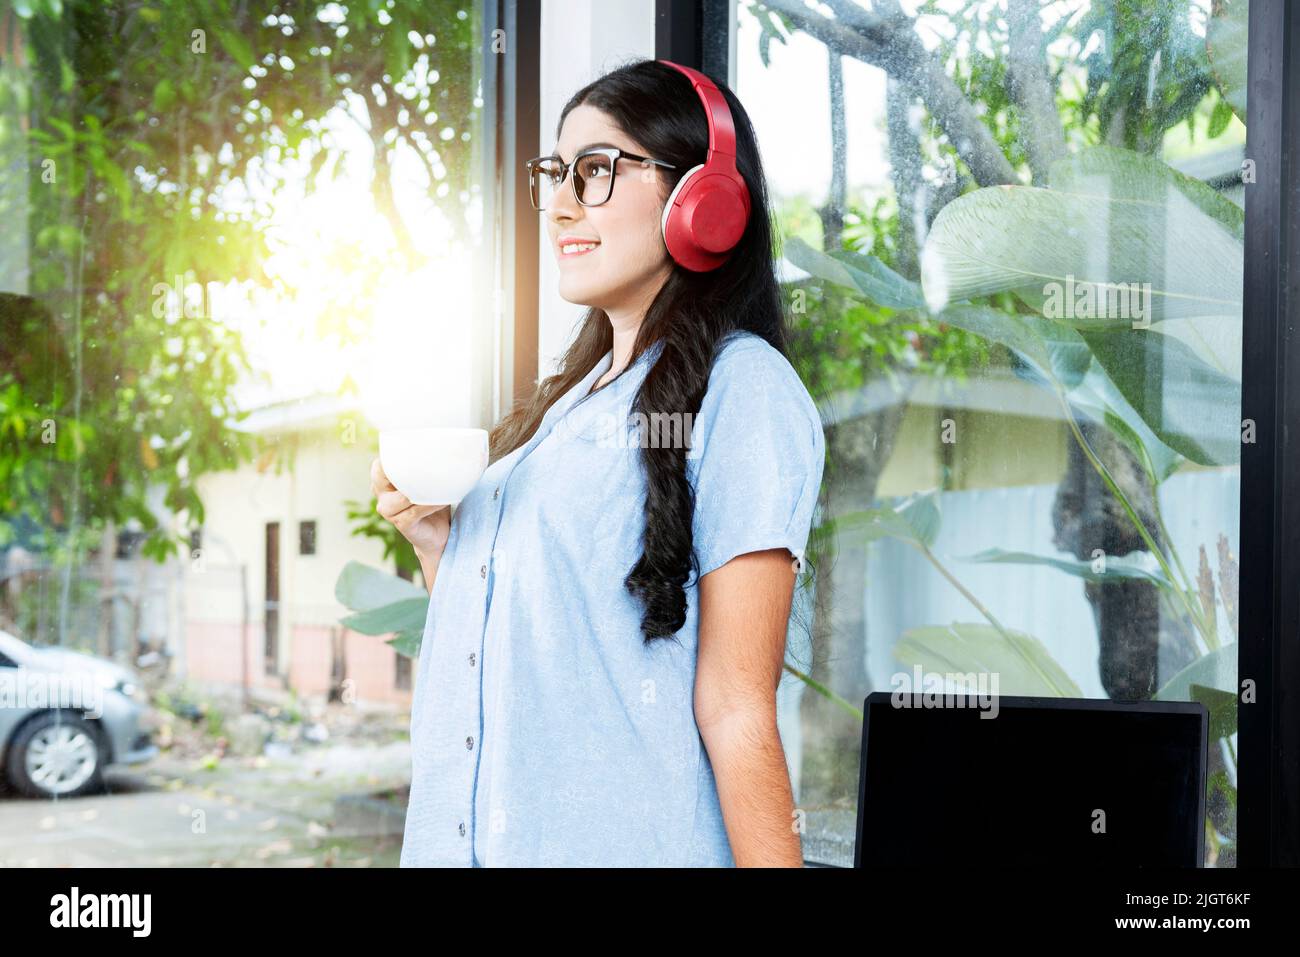 Asian woman with eyeglass listening to music with headphones and holding a cup of coffee with a laptop on the table in the coffee shop Stock Photo